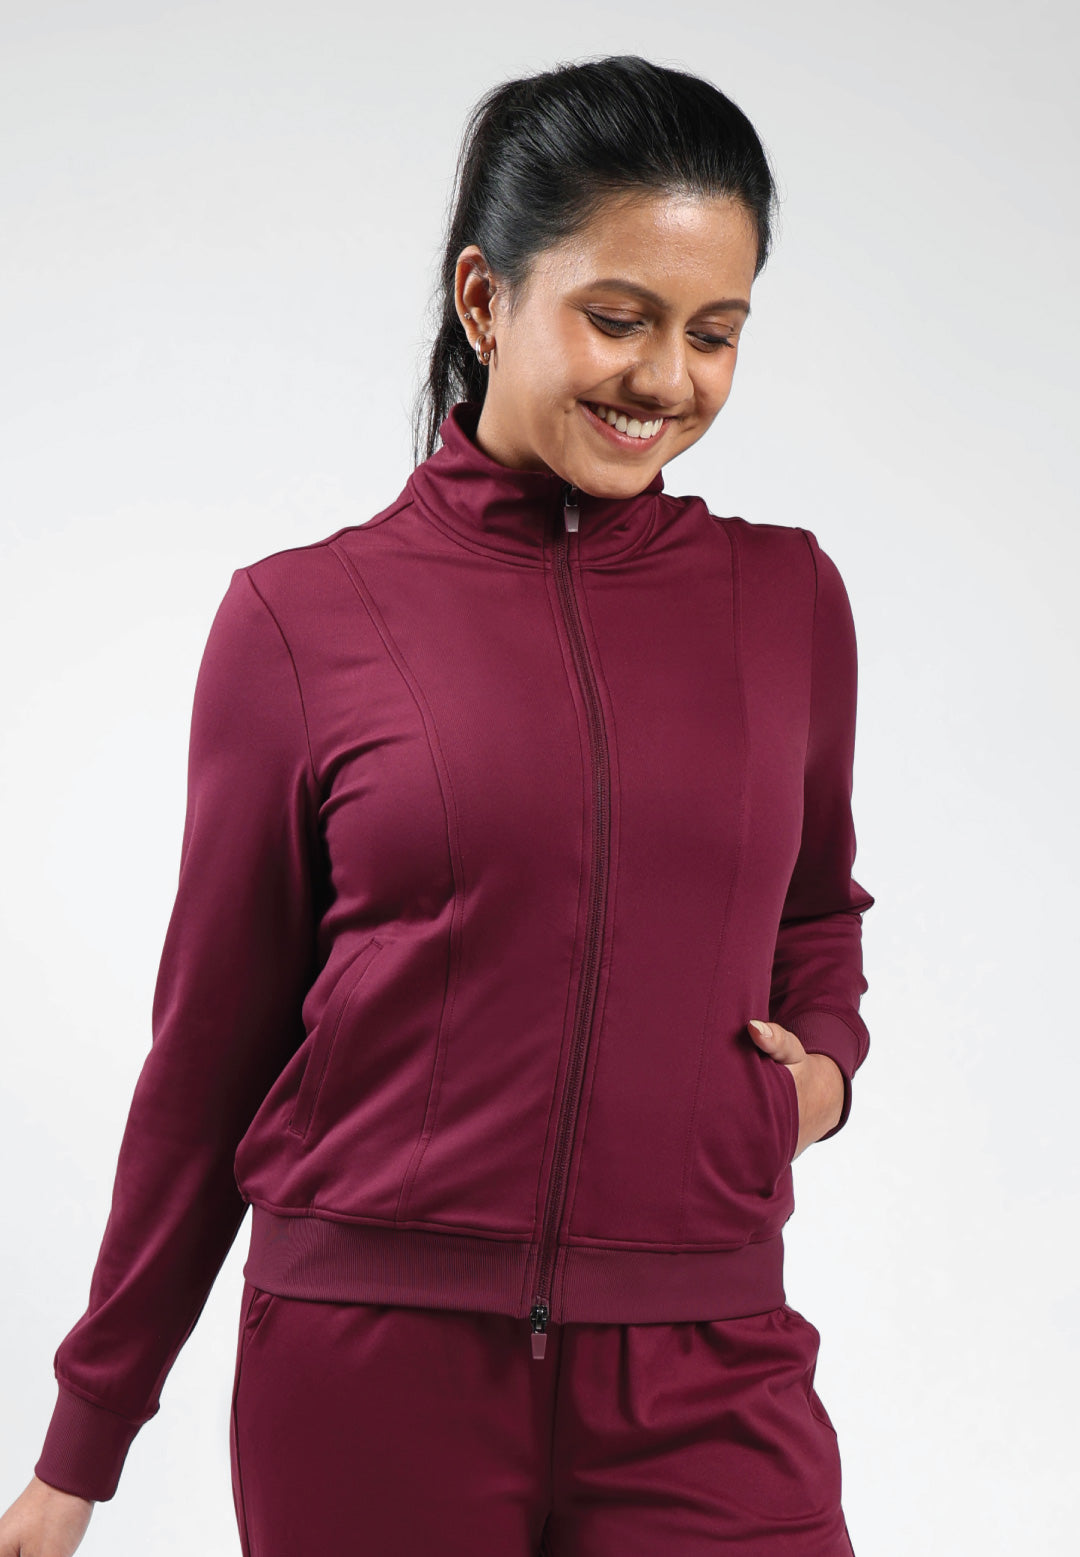 Buy Running Clothes for Women Online from BlissClub